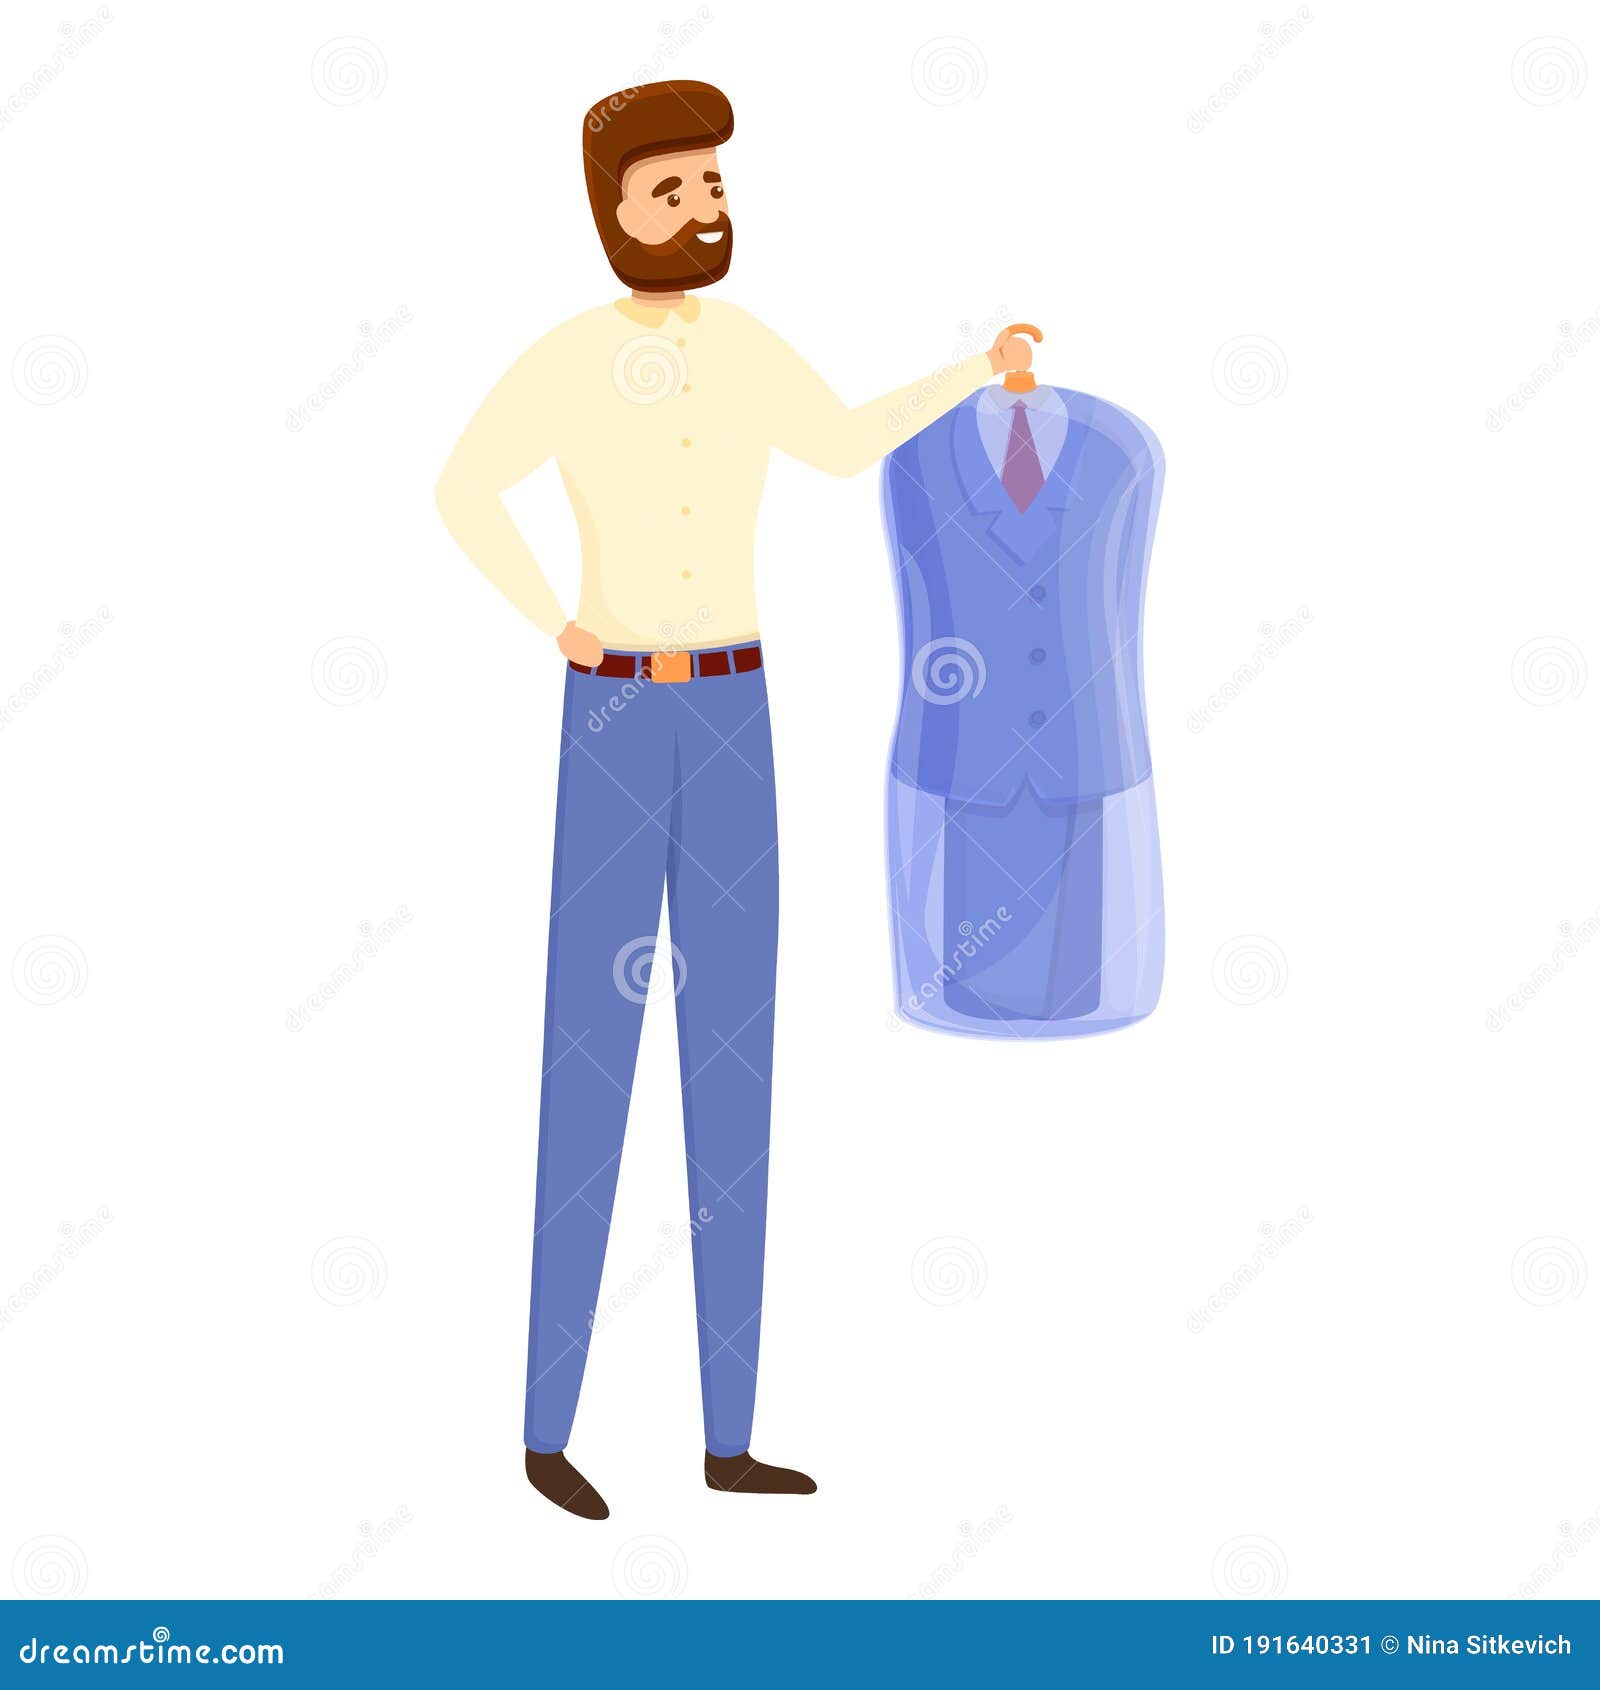 Laundry Suit Icon, Cartoon Style Stock Vector - Illustration of cloth ...